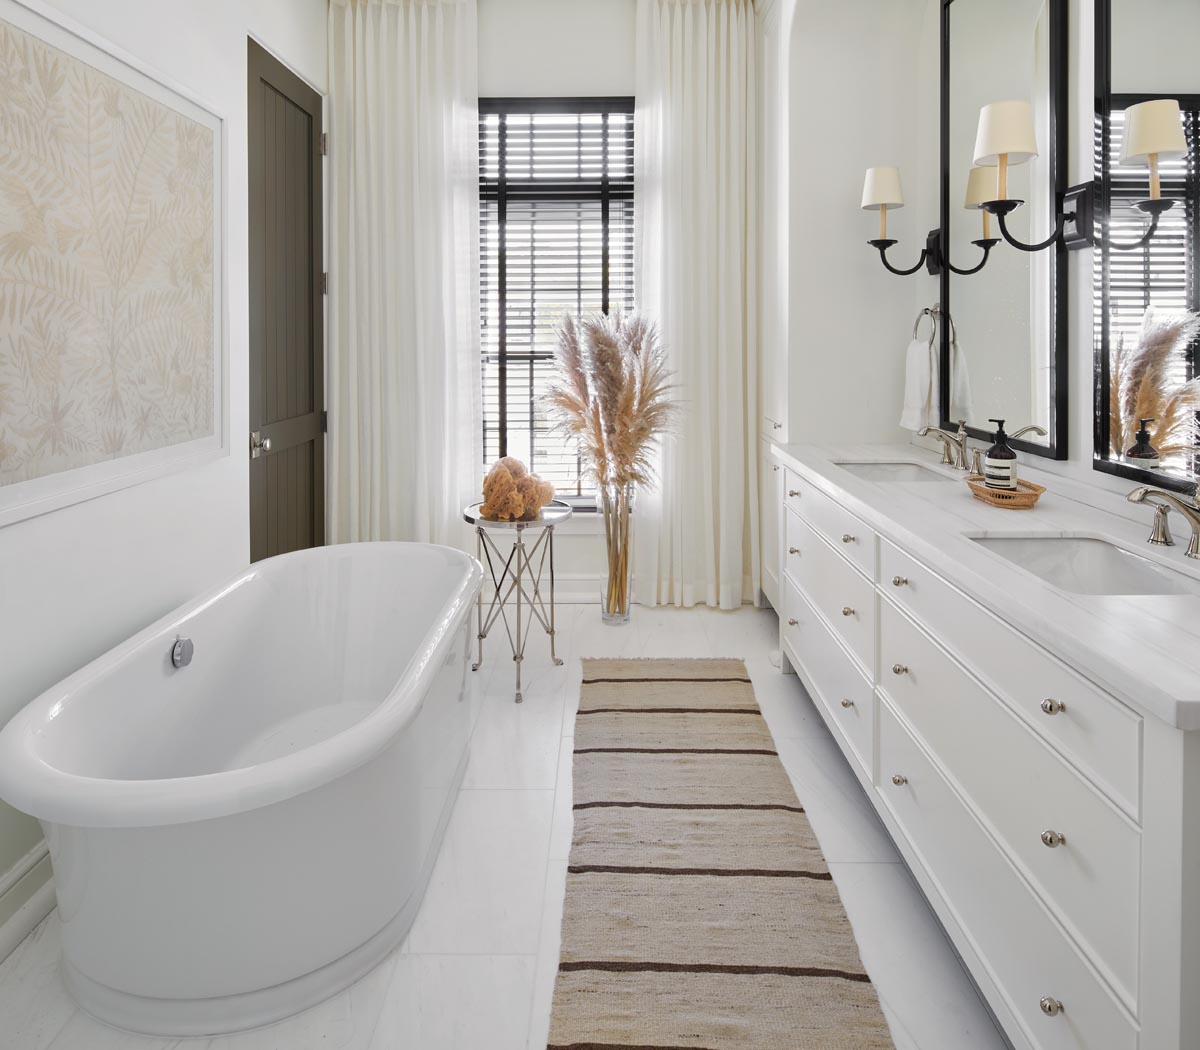 White cabinets, white-veined marble, and a freestanding Kohler tub give an airy spa-like ambiance to the primary bathroom. A sheer unlined drapery from Fabricut brings an ethereal touch to the contrasting black Venetian blinds. An antique nickel Directoire table and striped antique kilim rug ensure an eclectic layered look.